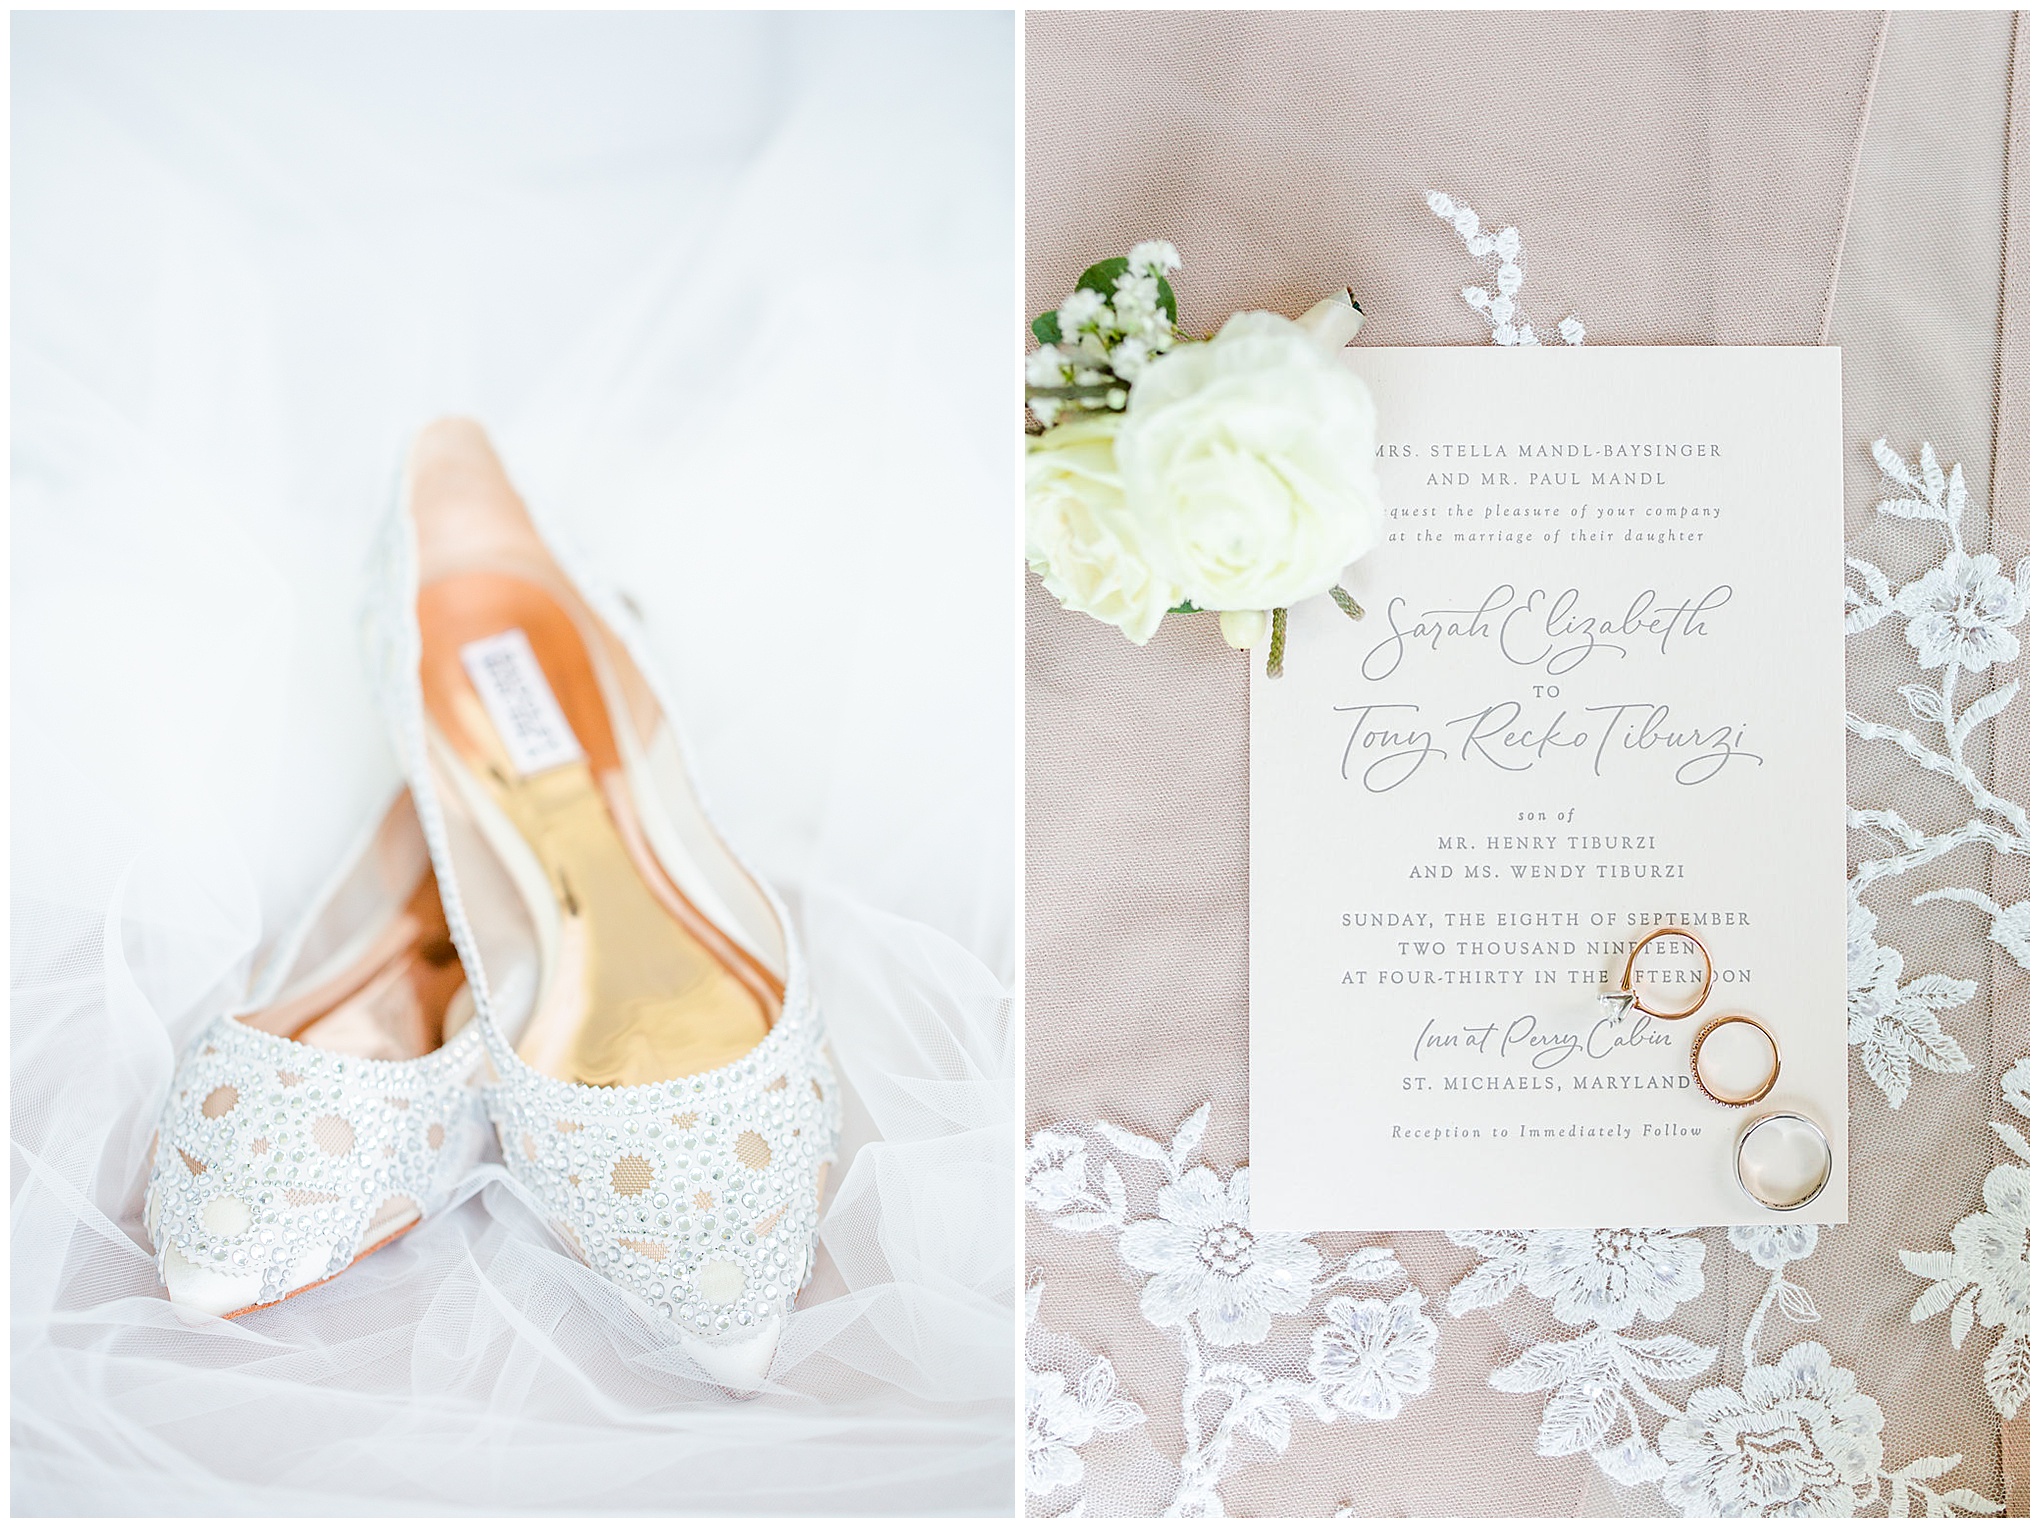 why to wear a wedding veil, wedding veil, how to use your wedding veil, wedding veil tips, wedding photography tips, wedding details, wedding photography ideas, D.C. wedding photographer, Virginia wedding photographer, Baltimore wedding photographer, Rachel E.H. Photography, bridal shoes, embroidered wedding veil